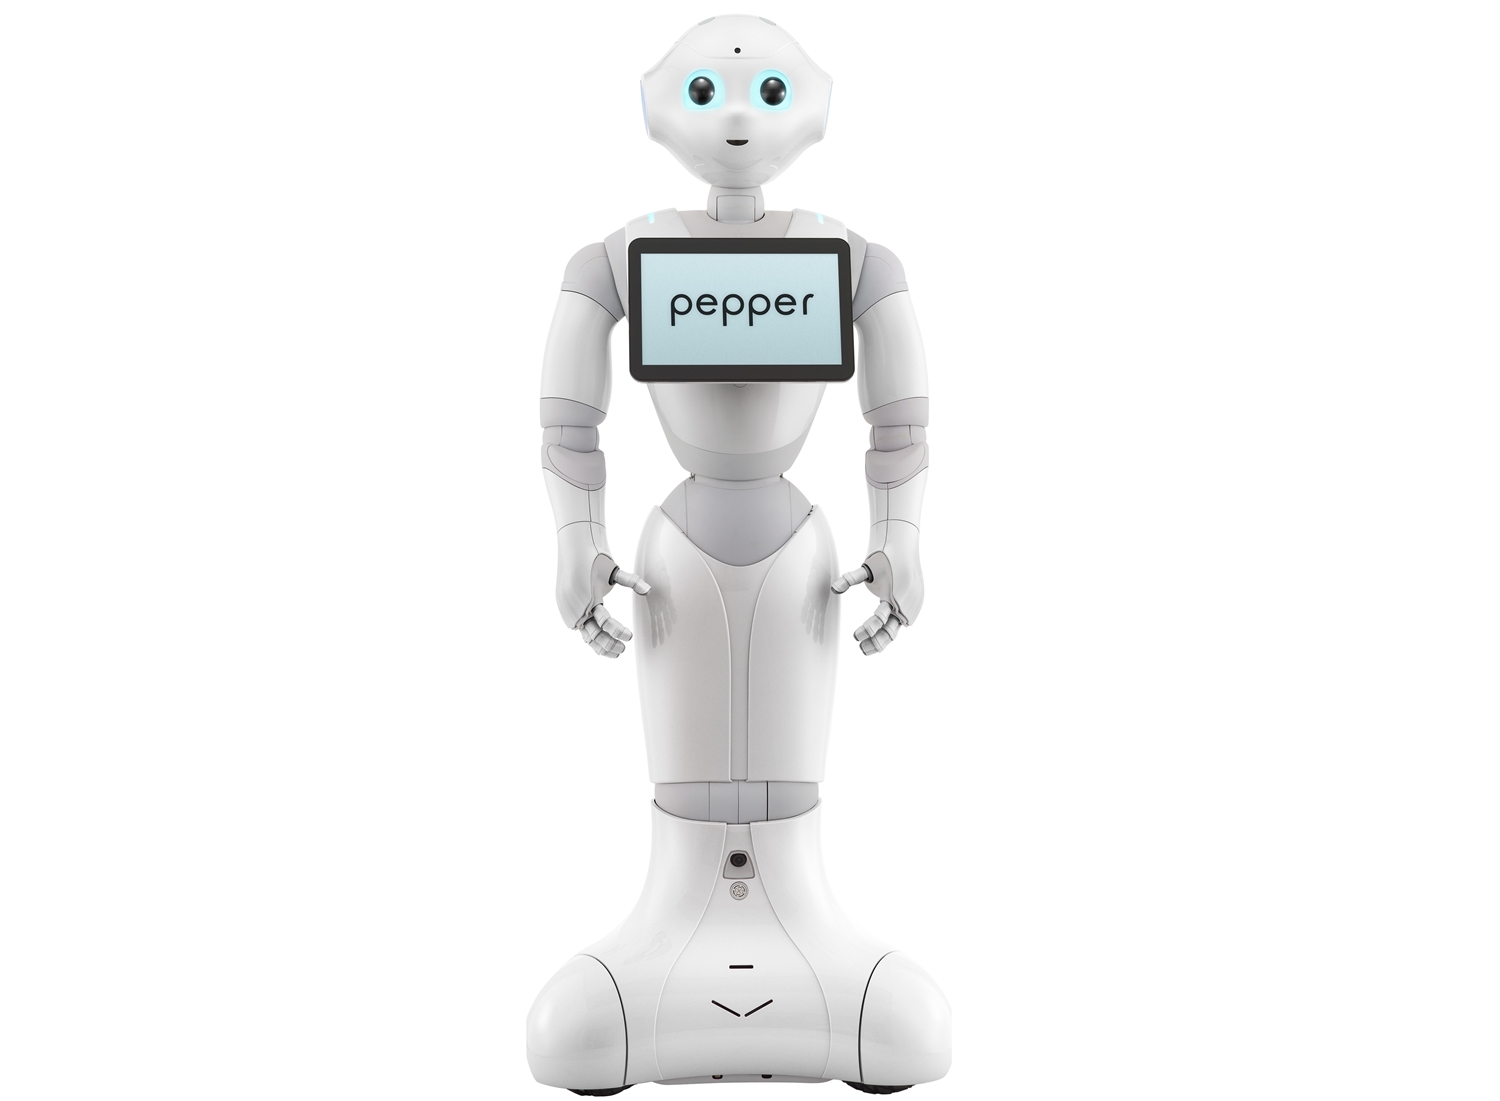 Pepper is a Sub-$2,000 Emotional Robot in Japan